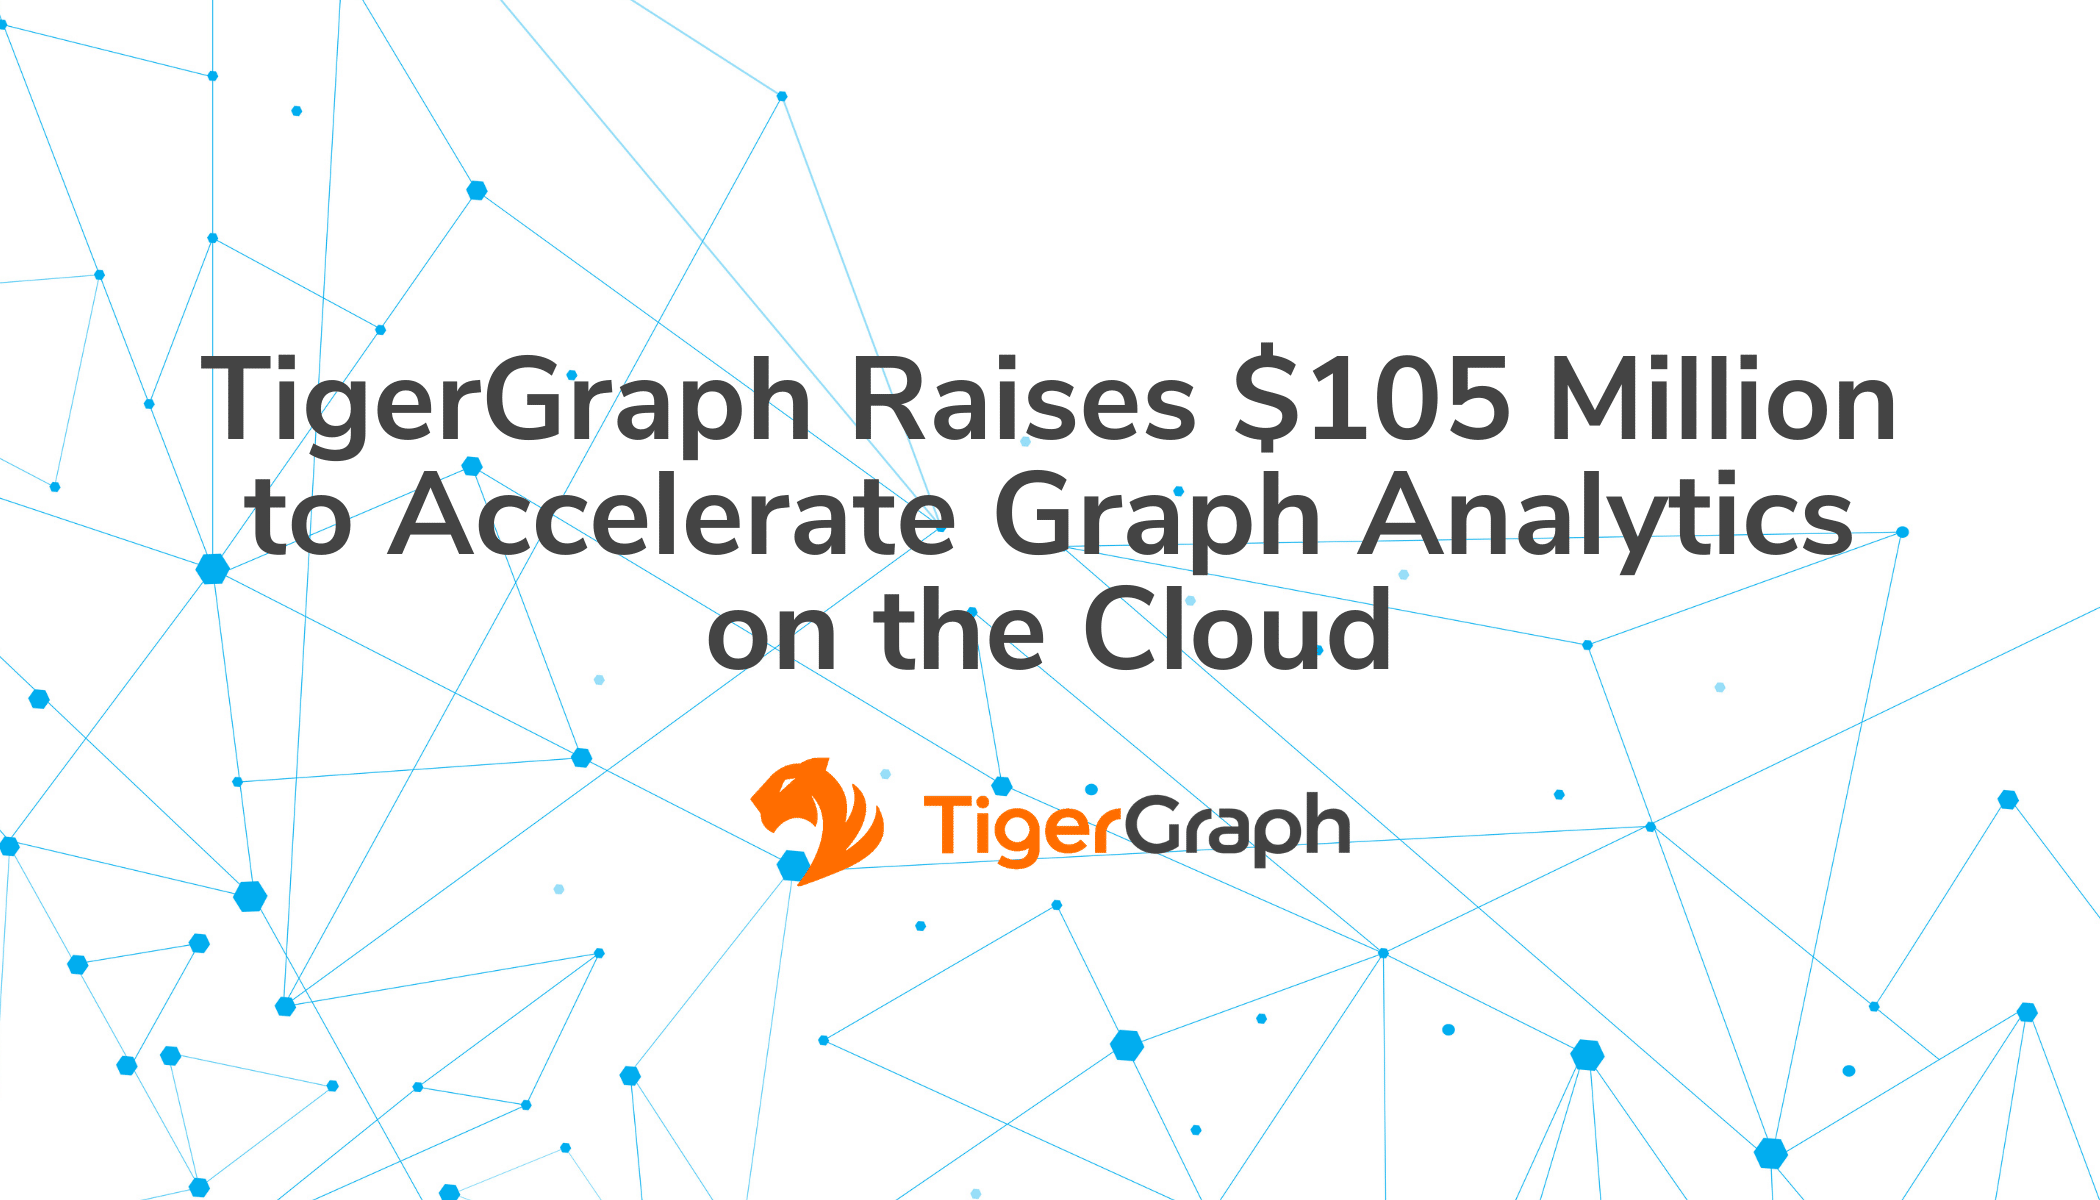 TigerGraph Raises $105 Million to Accelerate Graph Analytics on the Cloud